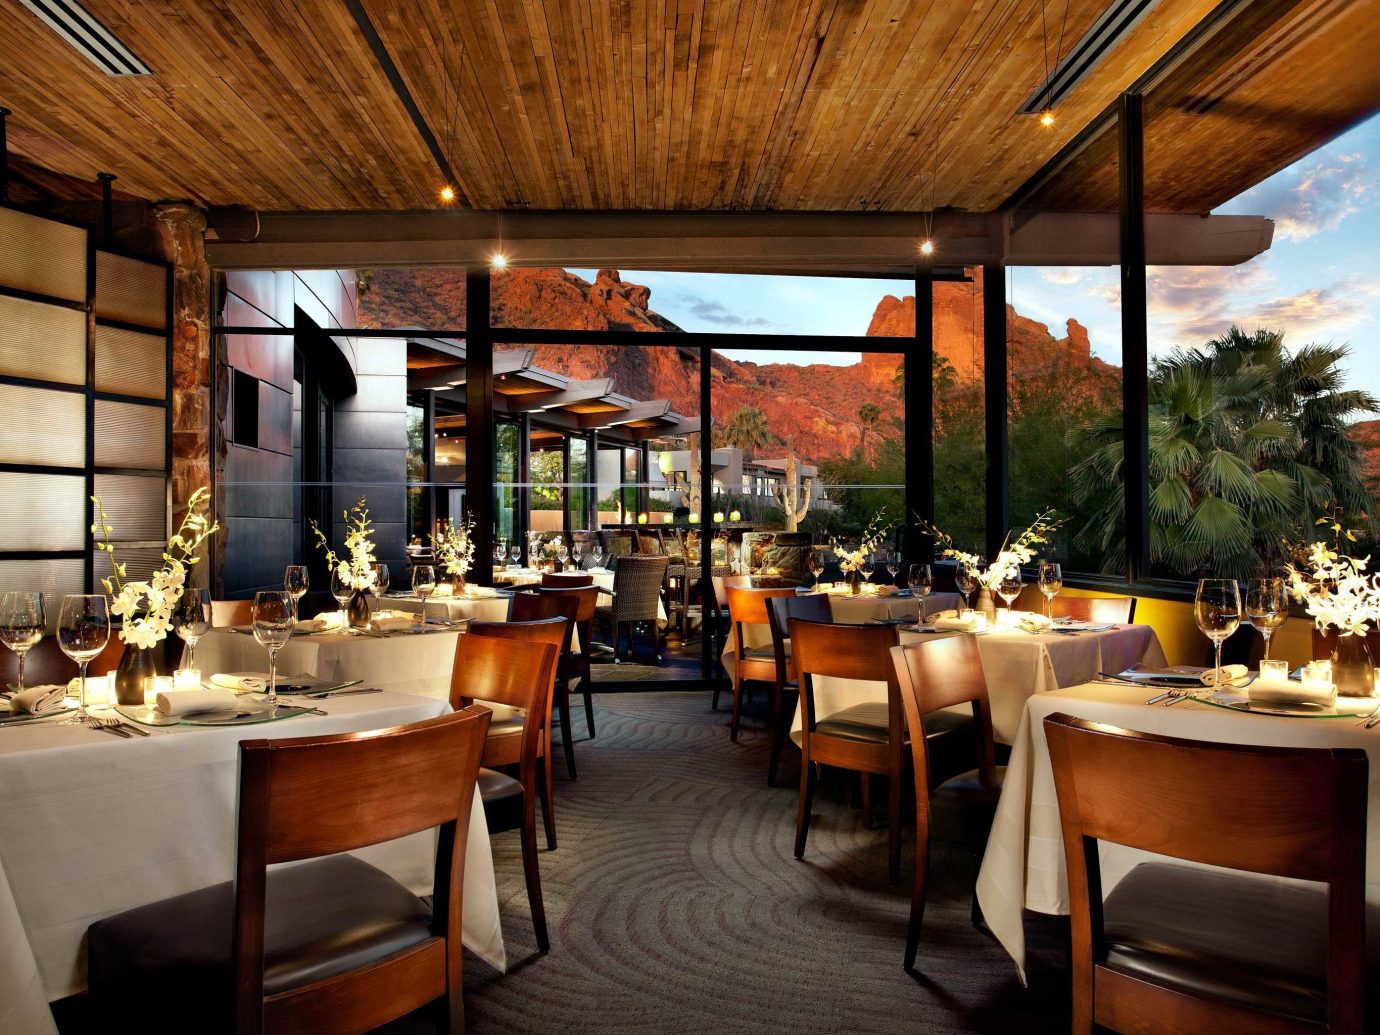 Restaurant at Sanctuary on Camelback Mountain Resort and Spa